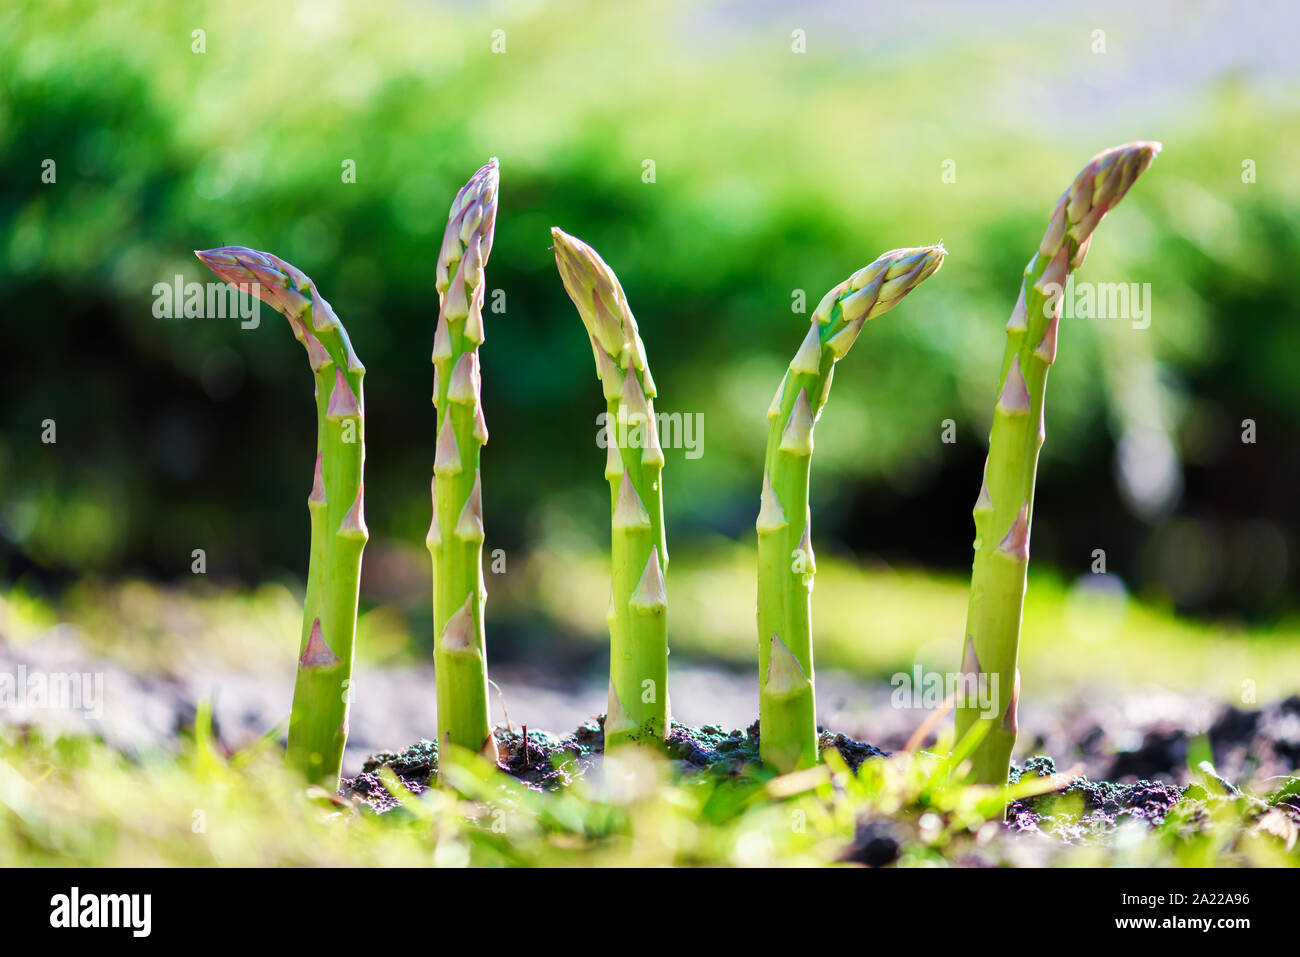 Young green asparagus sprout in garden growth closeup. Food photography Stock Photo